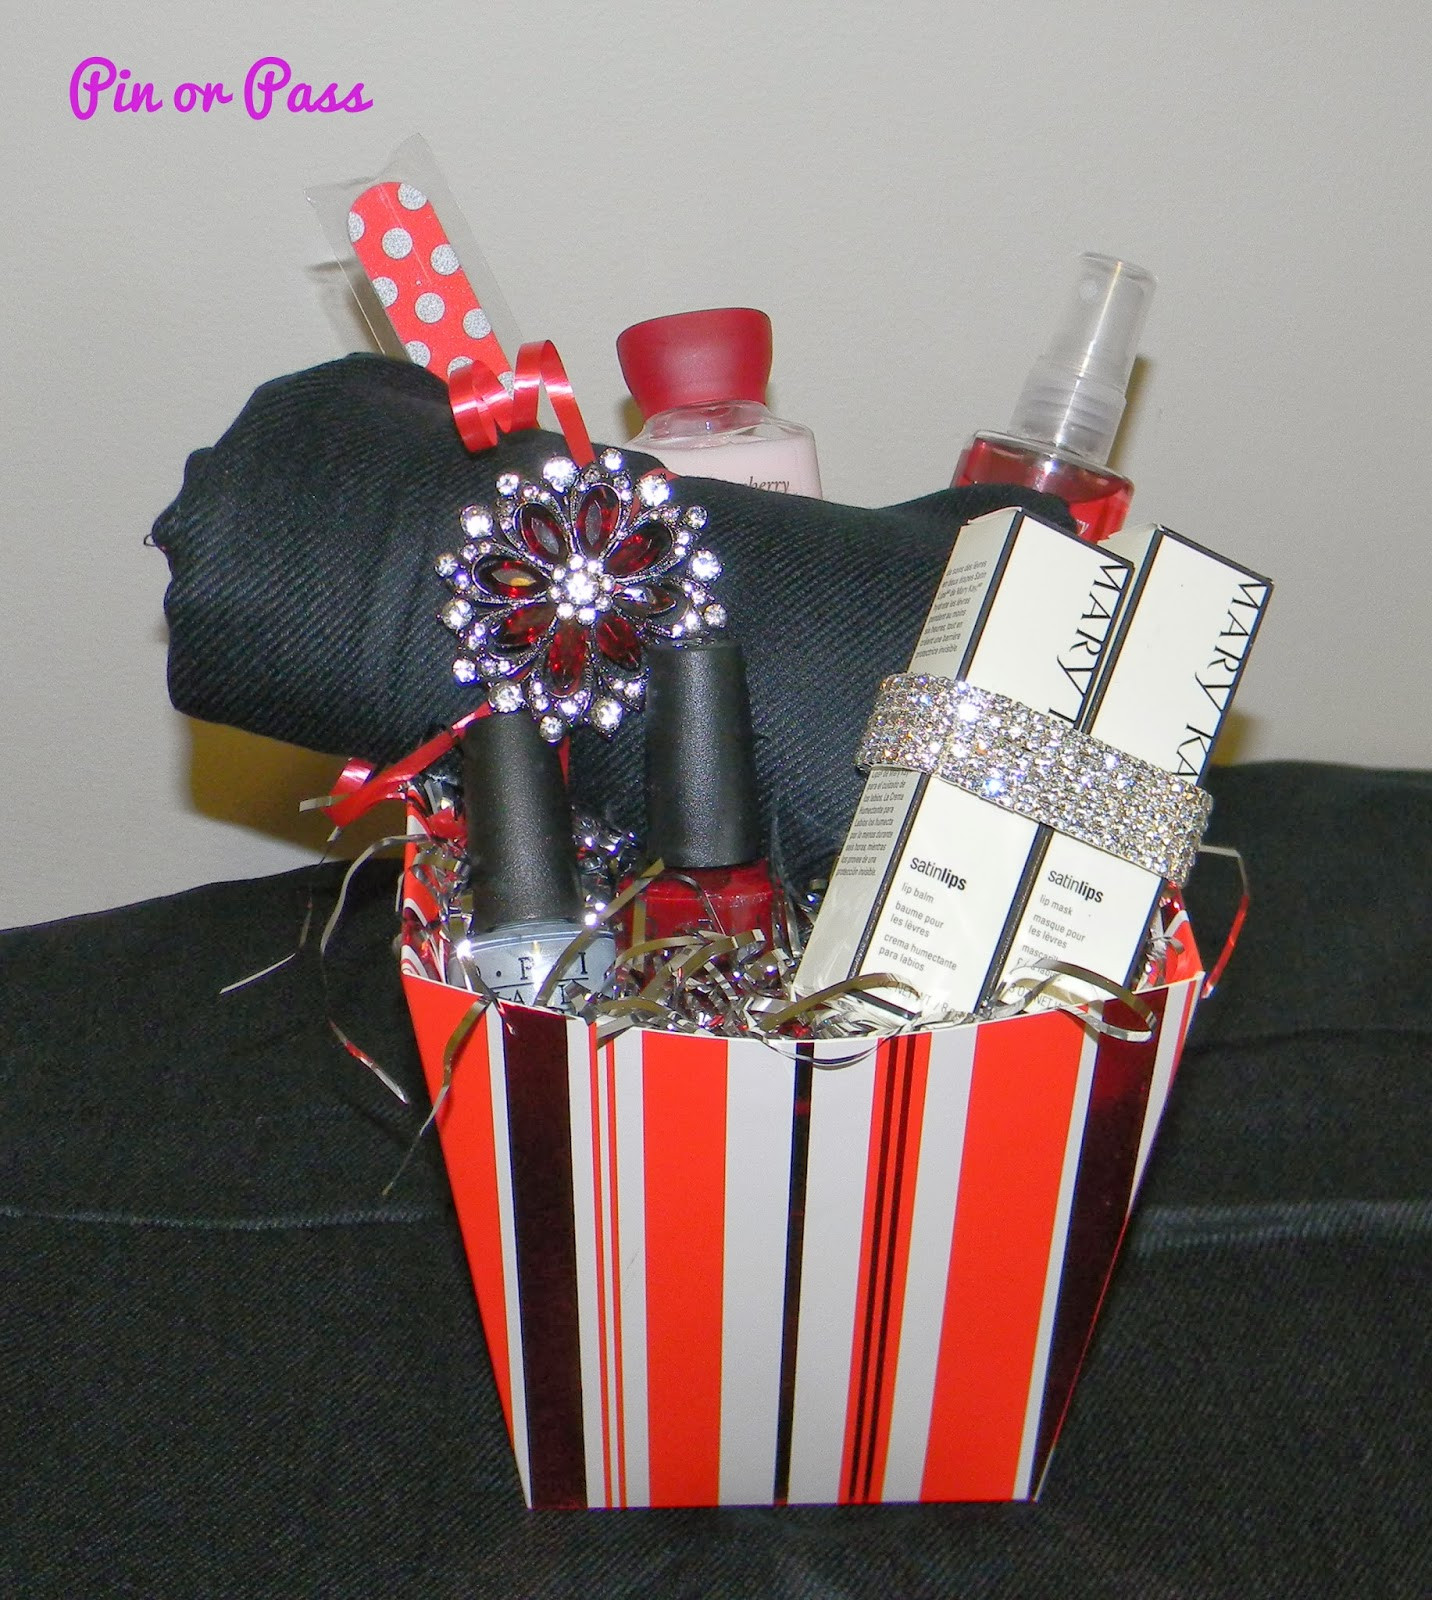 Christmas Party Raffle Ideas
 Pin or Pass A Holiday Gift Basket Idea Inspired by Pinterest